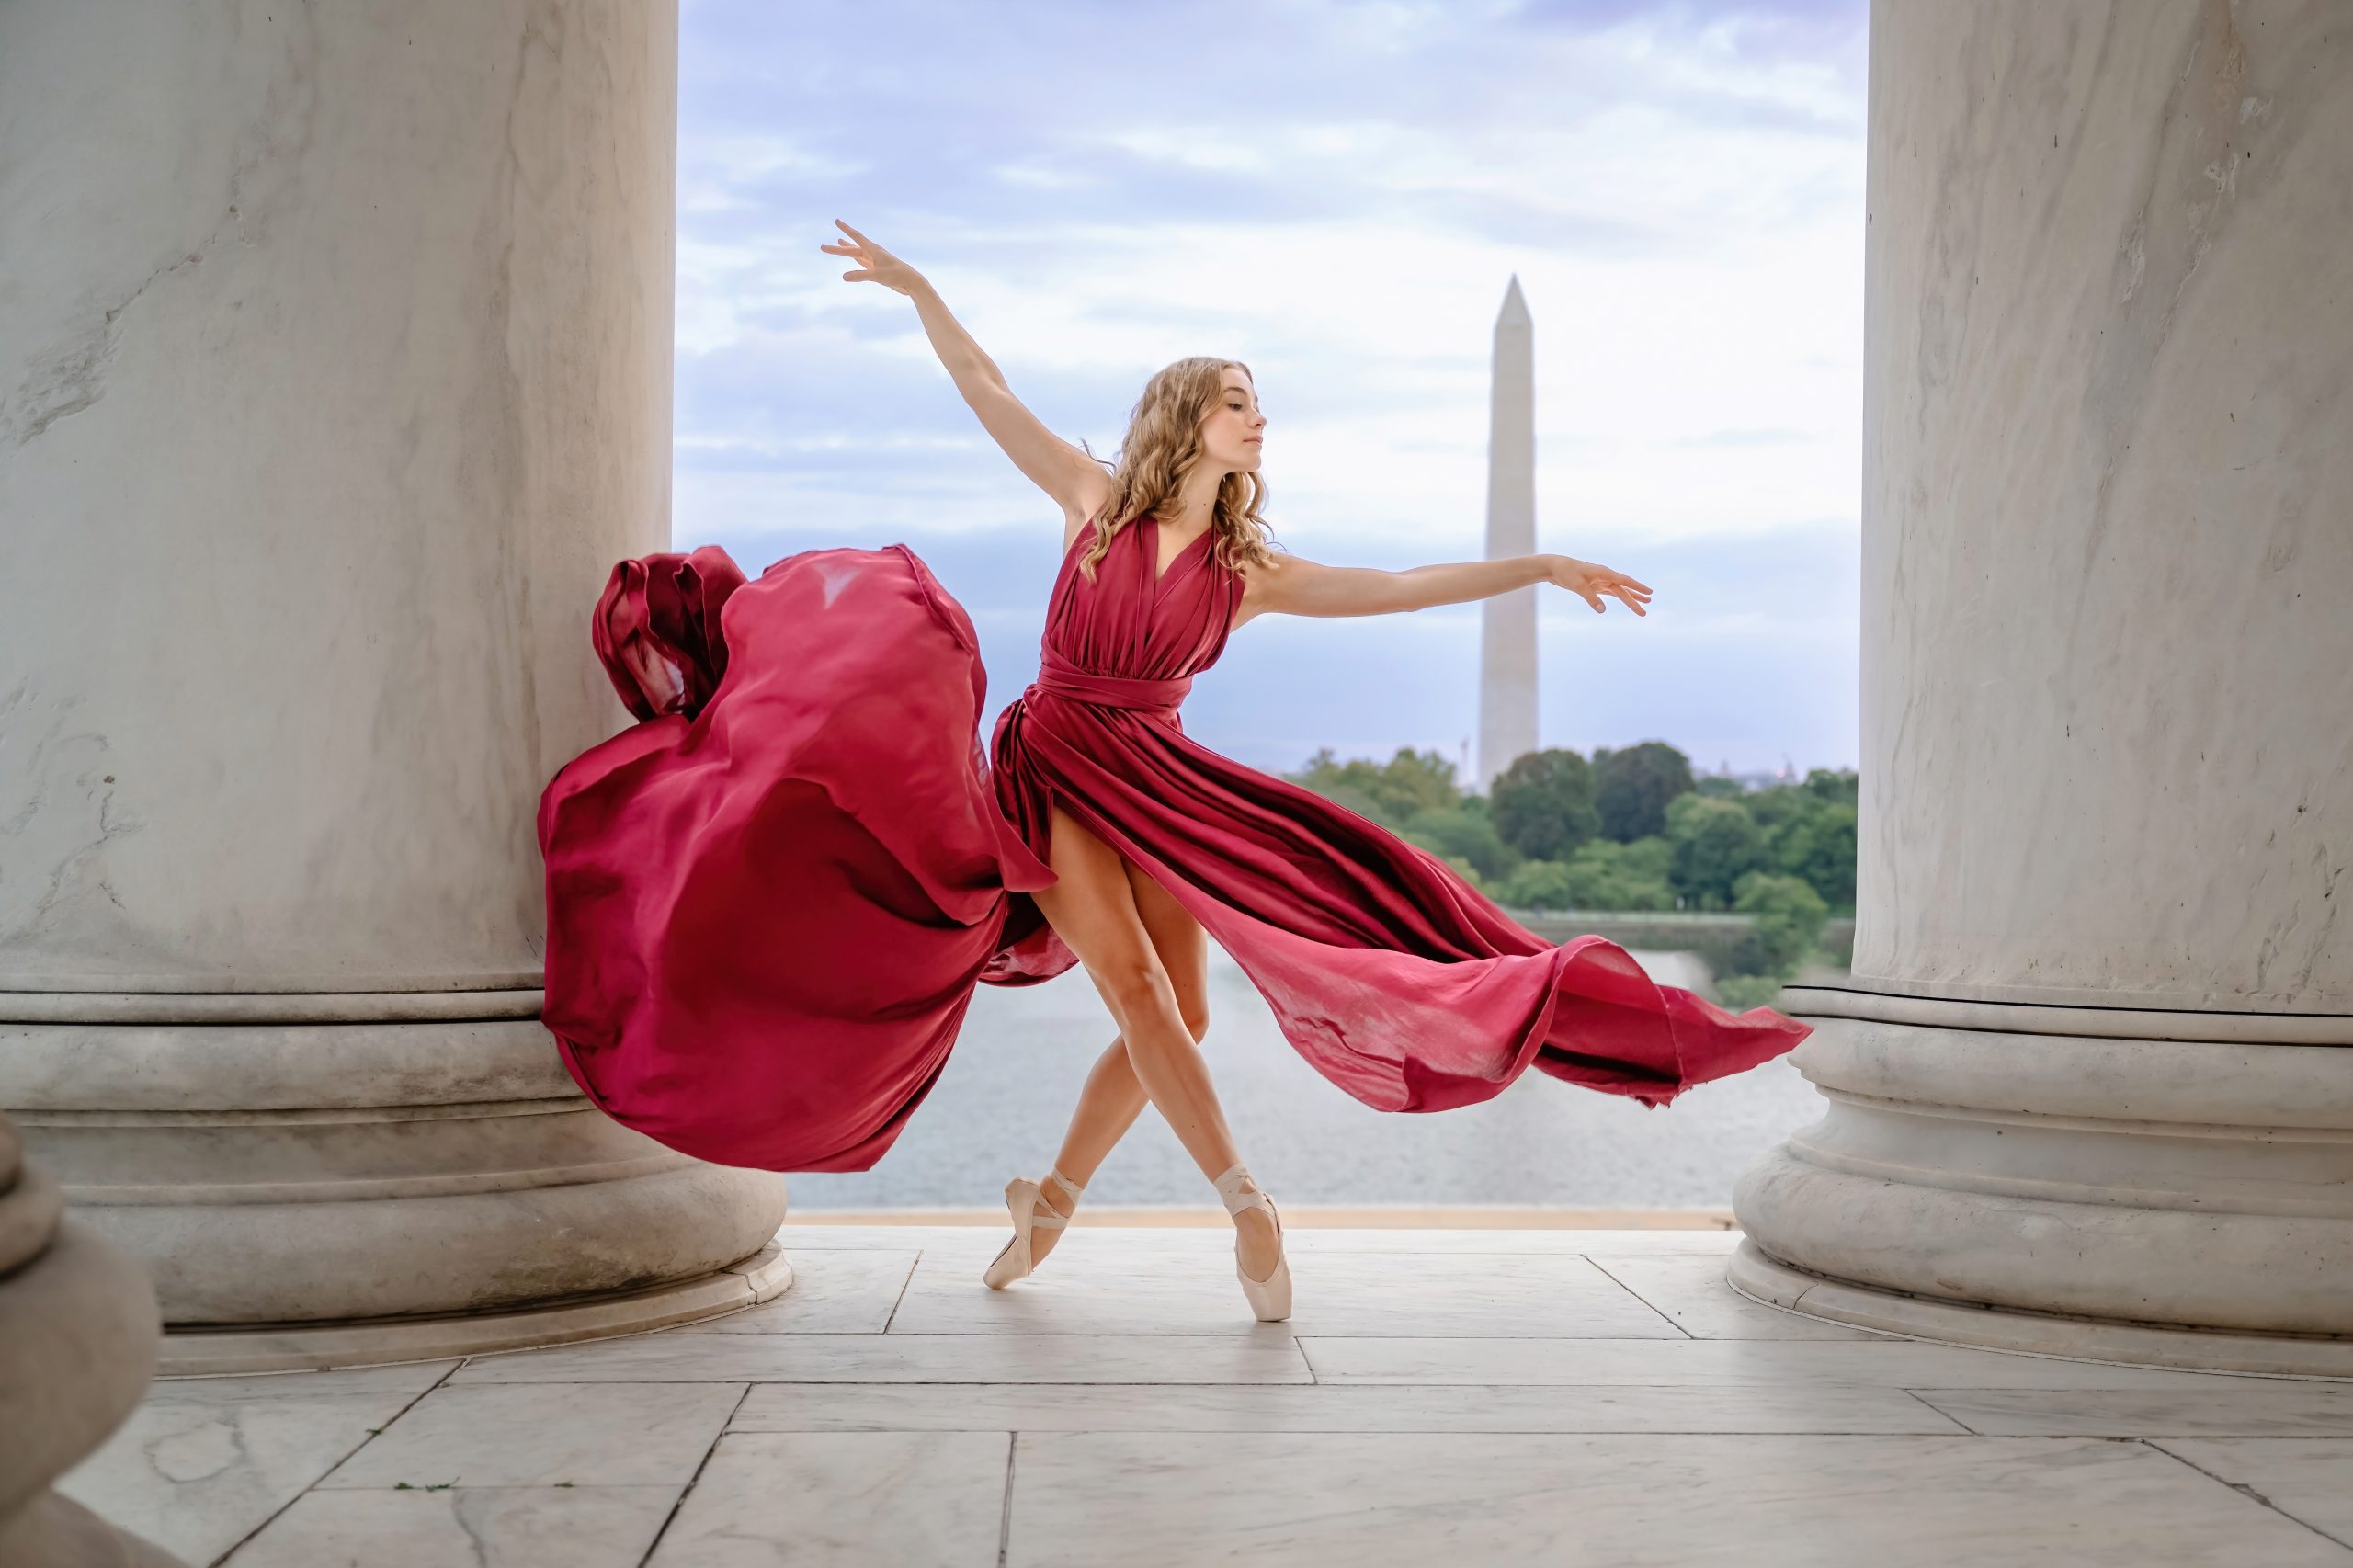 R-Class pointe shoes are now in the United States. Dancer in Washington DC wearing russian pointe shoes.